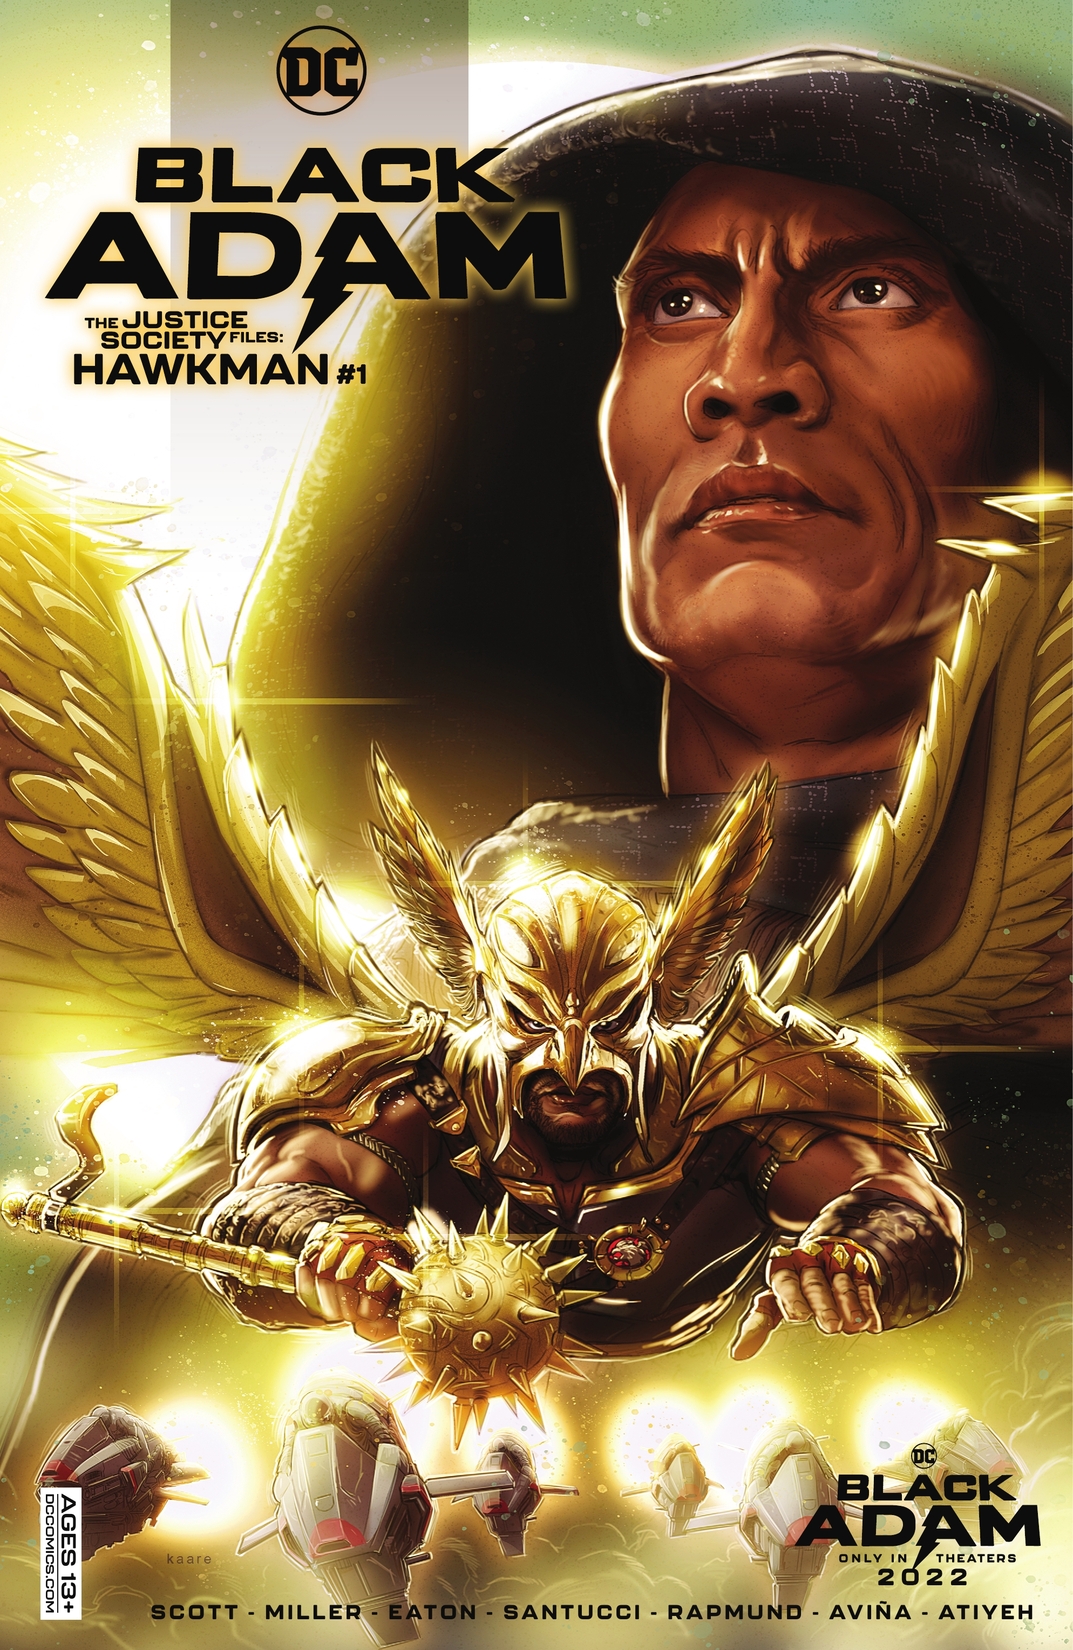 Black Adam - The Justice Society Files: Hawkman #1 preview images